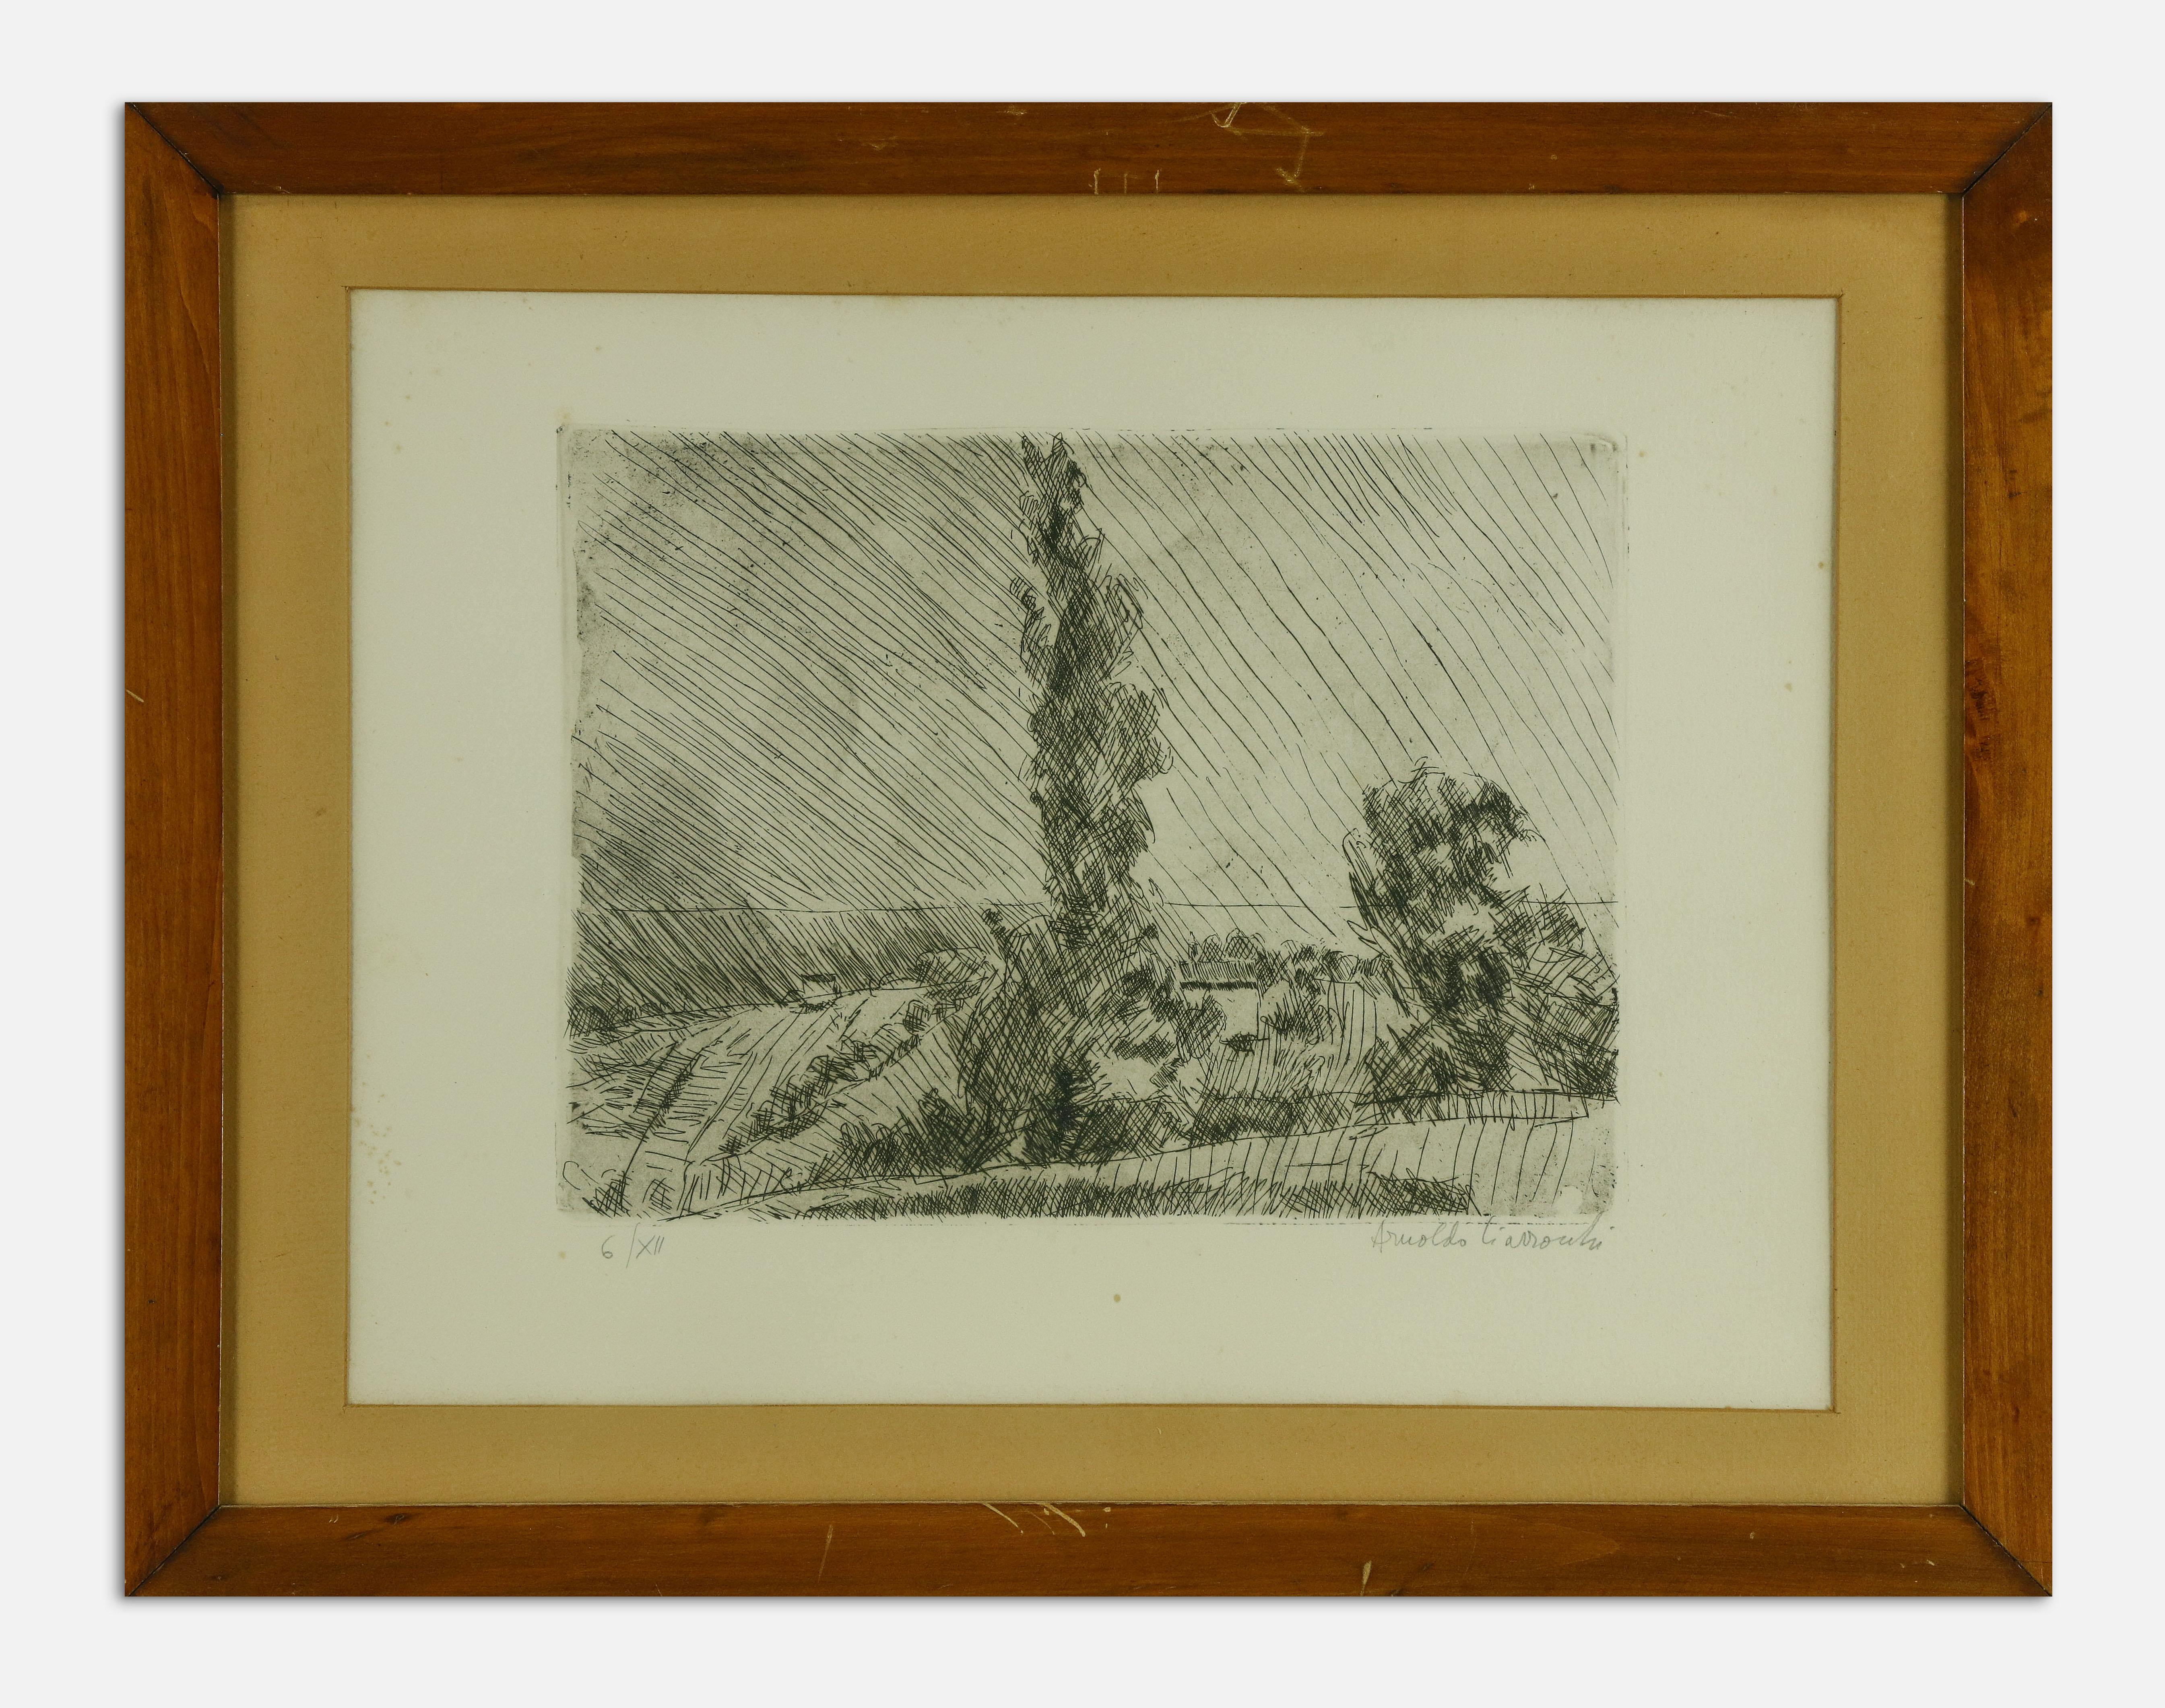 Landscape is a modern artwork realized by Arnoldo Ciarrocchi in the mid-20th Century.

Black and white etching.

Includes frame

Hand signed and dated on the lower margin. Edition of 6/XII